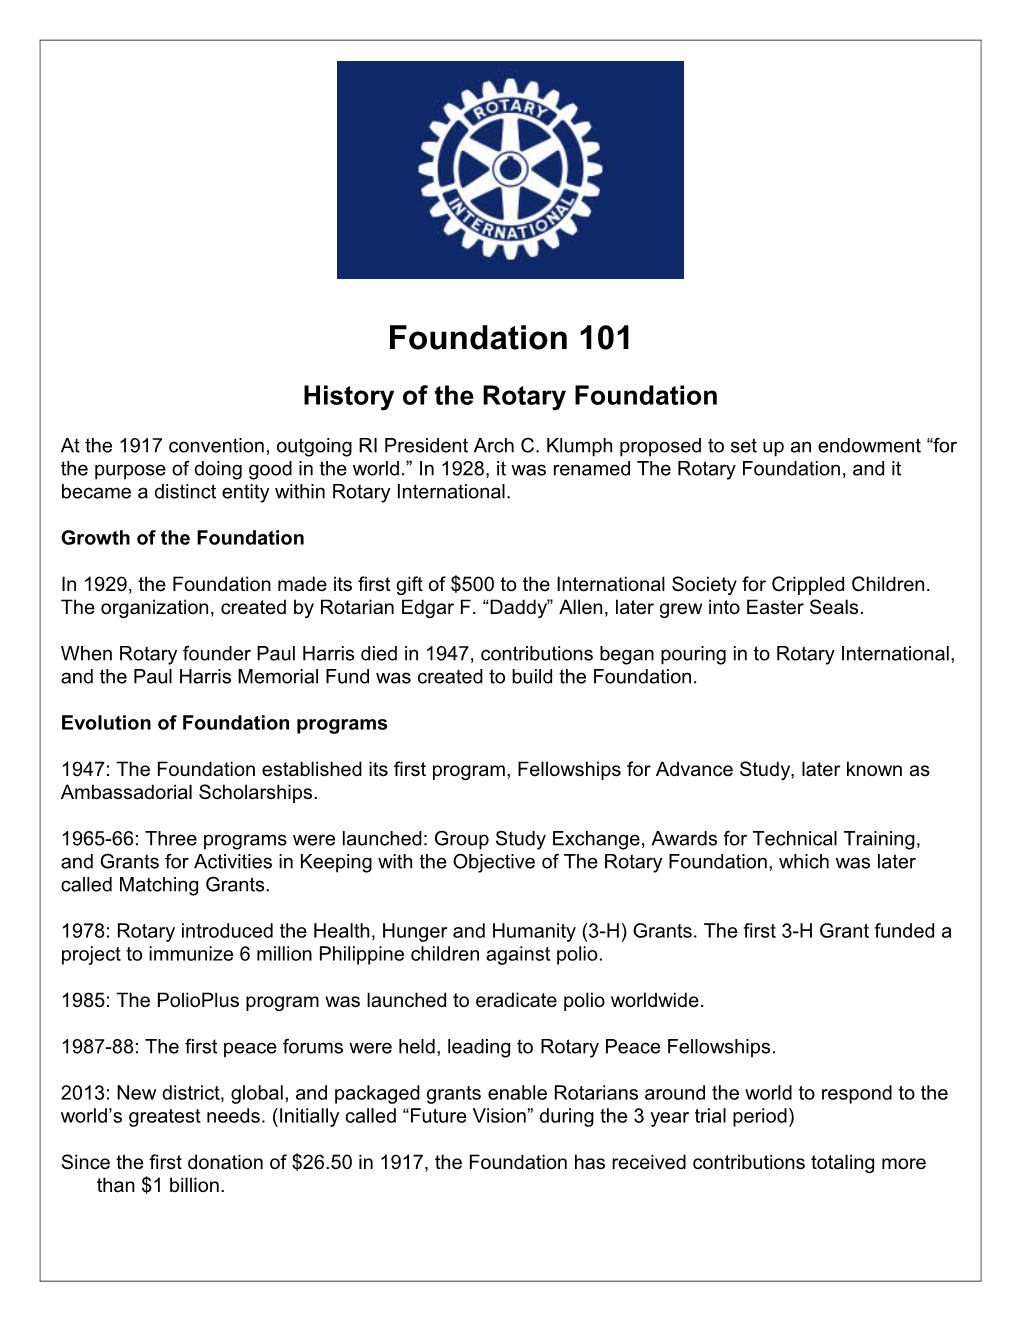 History of the Rotary Foundation